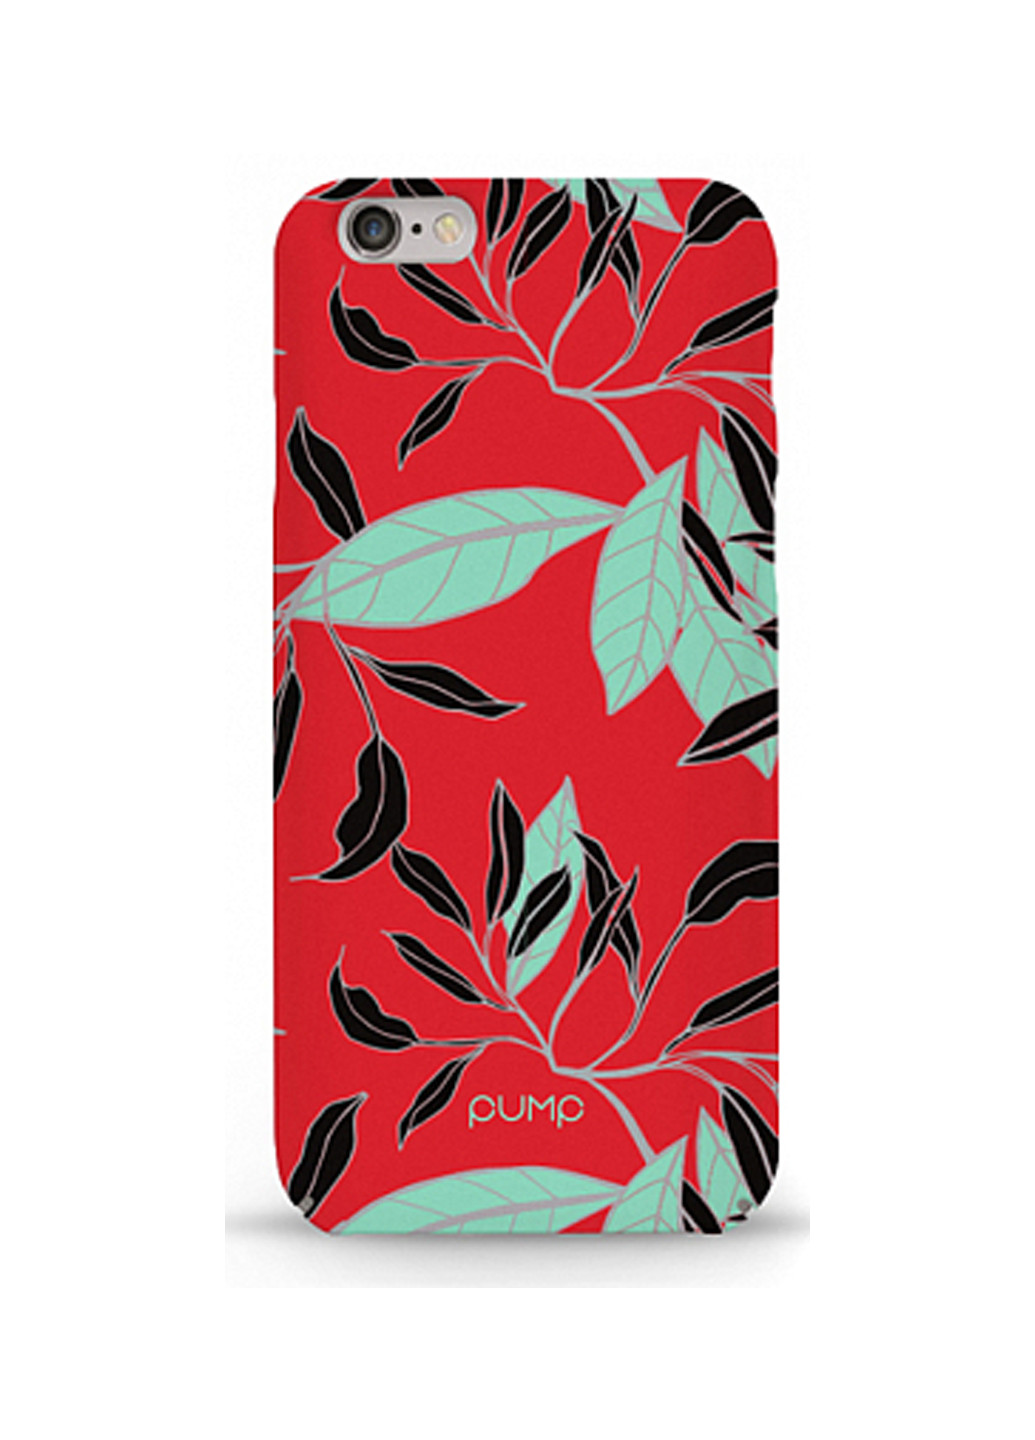 Чехол Tender Touch Case for iPhone 6/6S Floral Red Pump tender touch case для iphone 6/6s floral red (136993873)